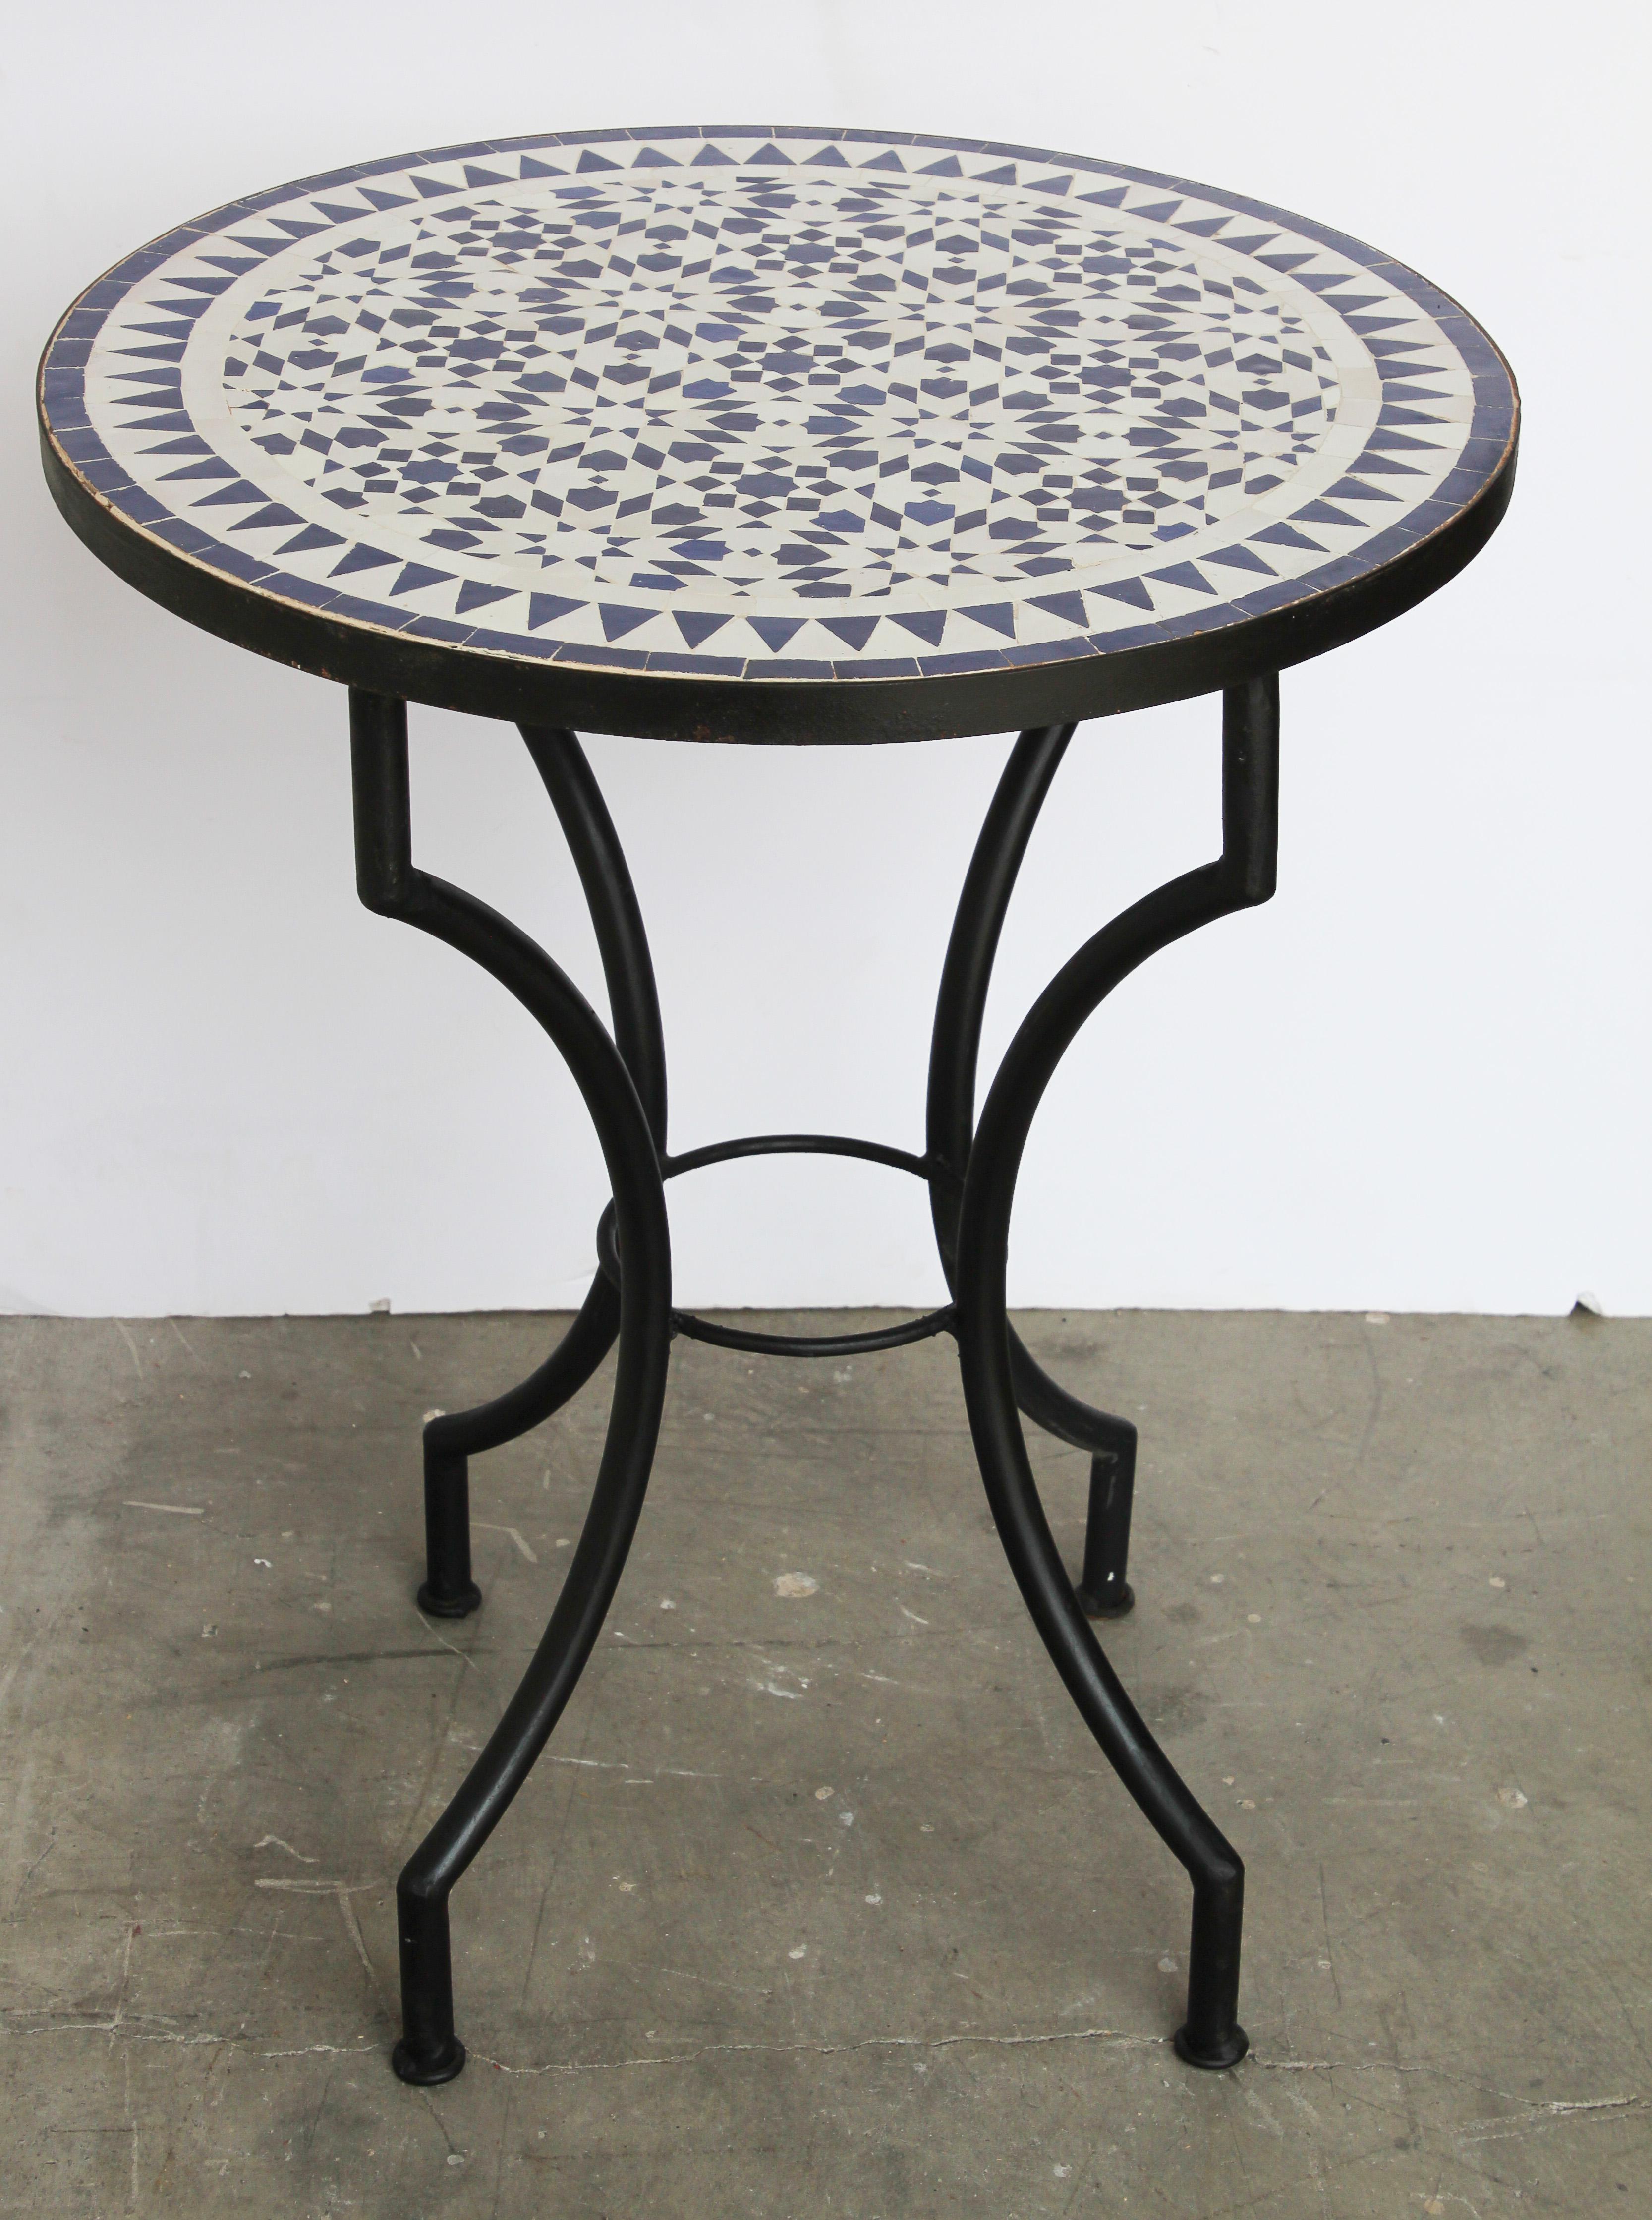 Moroccan Fez Mosaic Blue and White Tiles Bistro Table 4